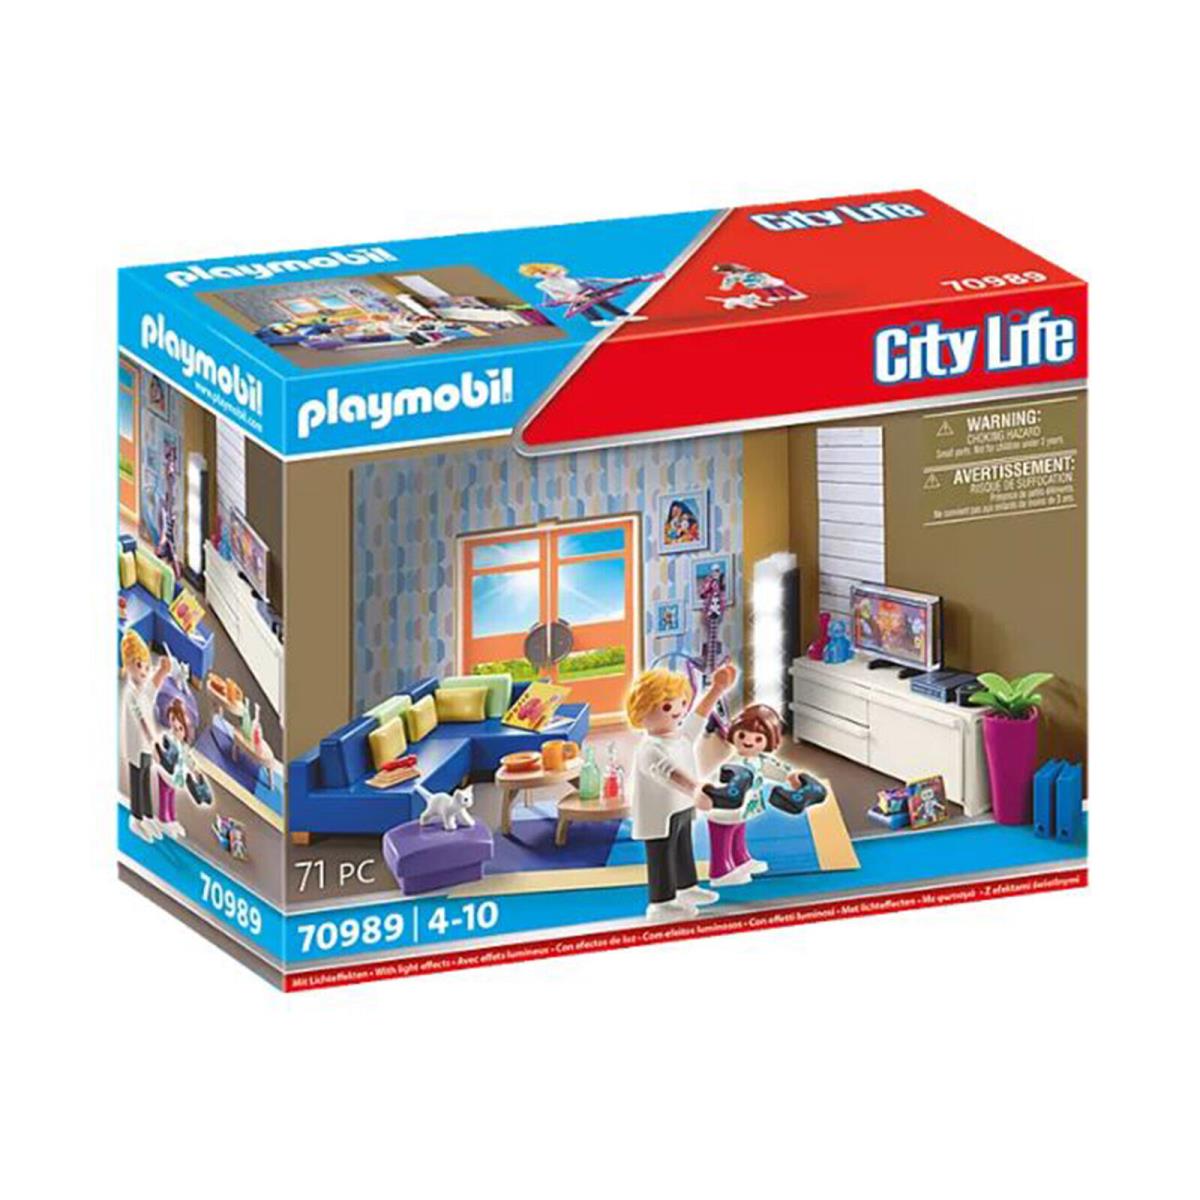 Playmobil City Life Family Room Building Set 70989 IN Stock